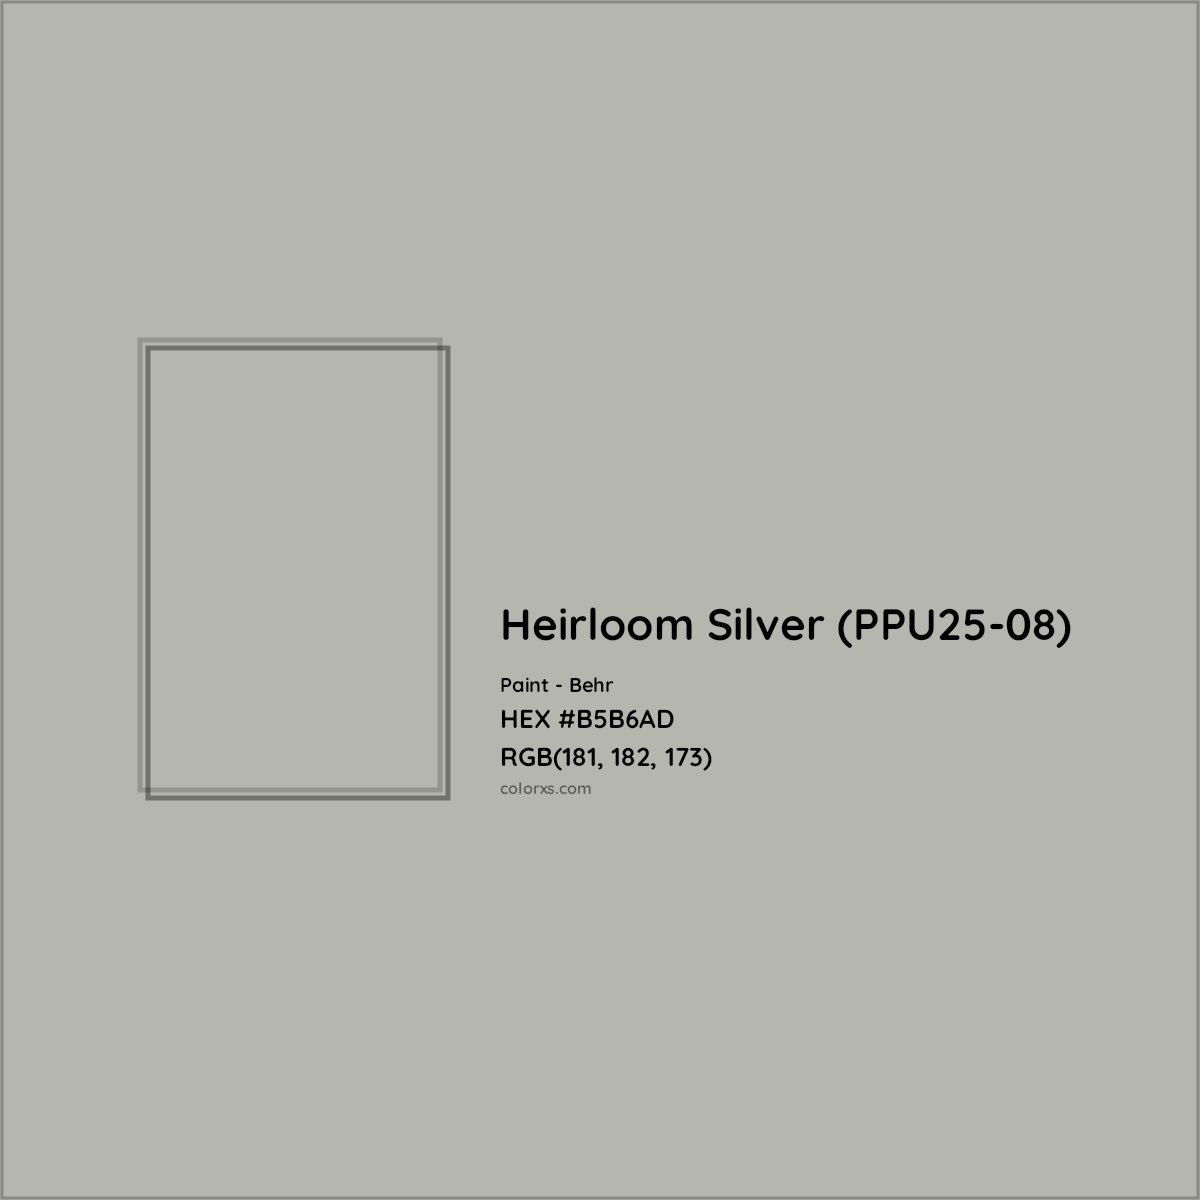 HEX #B5B6AD Heirloom Silver (PPU25-08) Paint Behr - Color Code